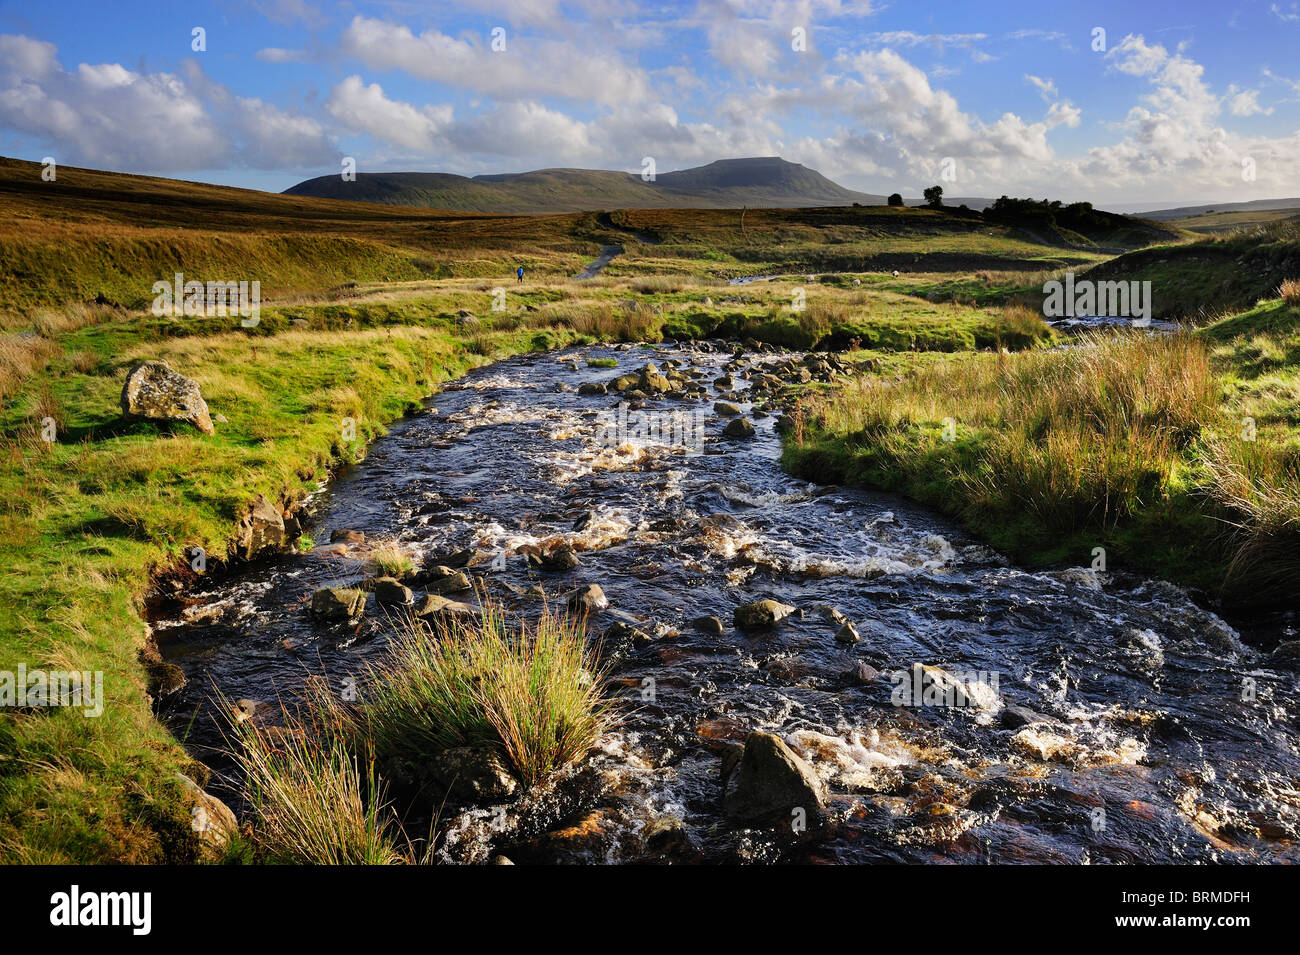 View of Ingleborough hill from Little Dale Beck, Blea Moor, Yorkshire Dales National Park, UK Stock Photo